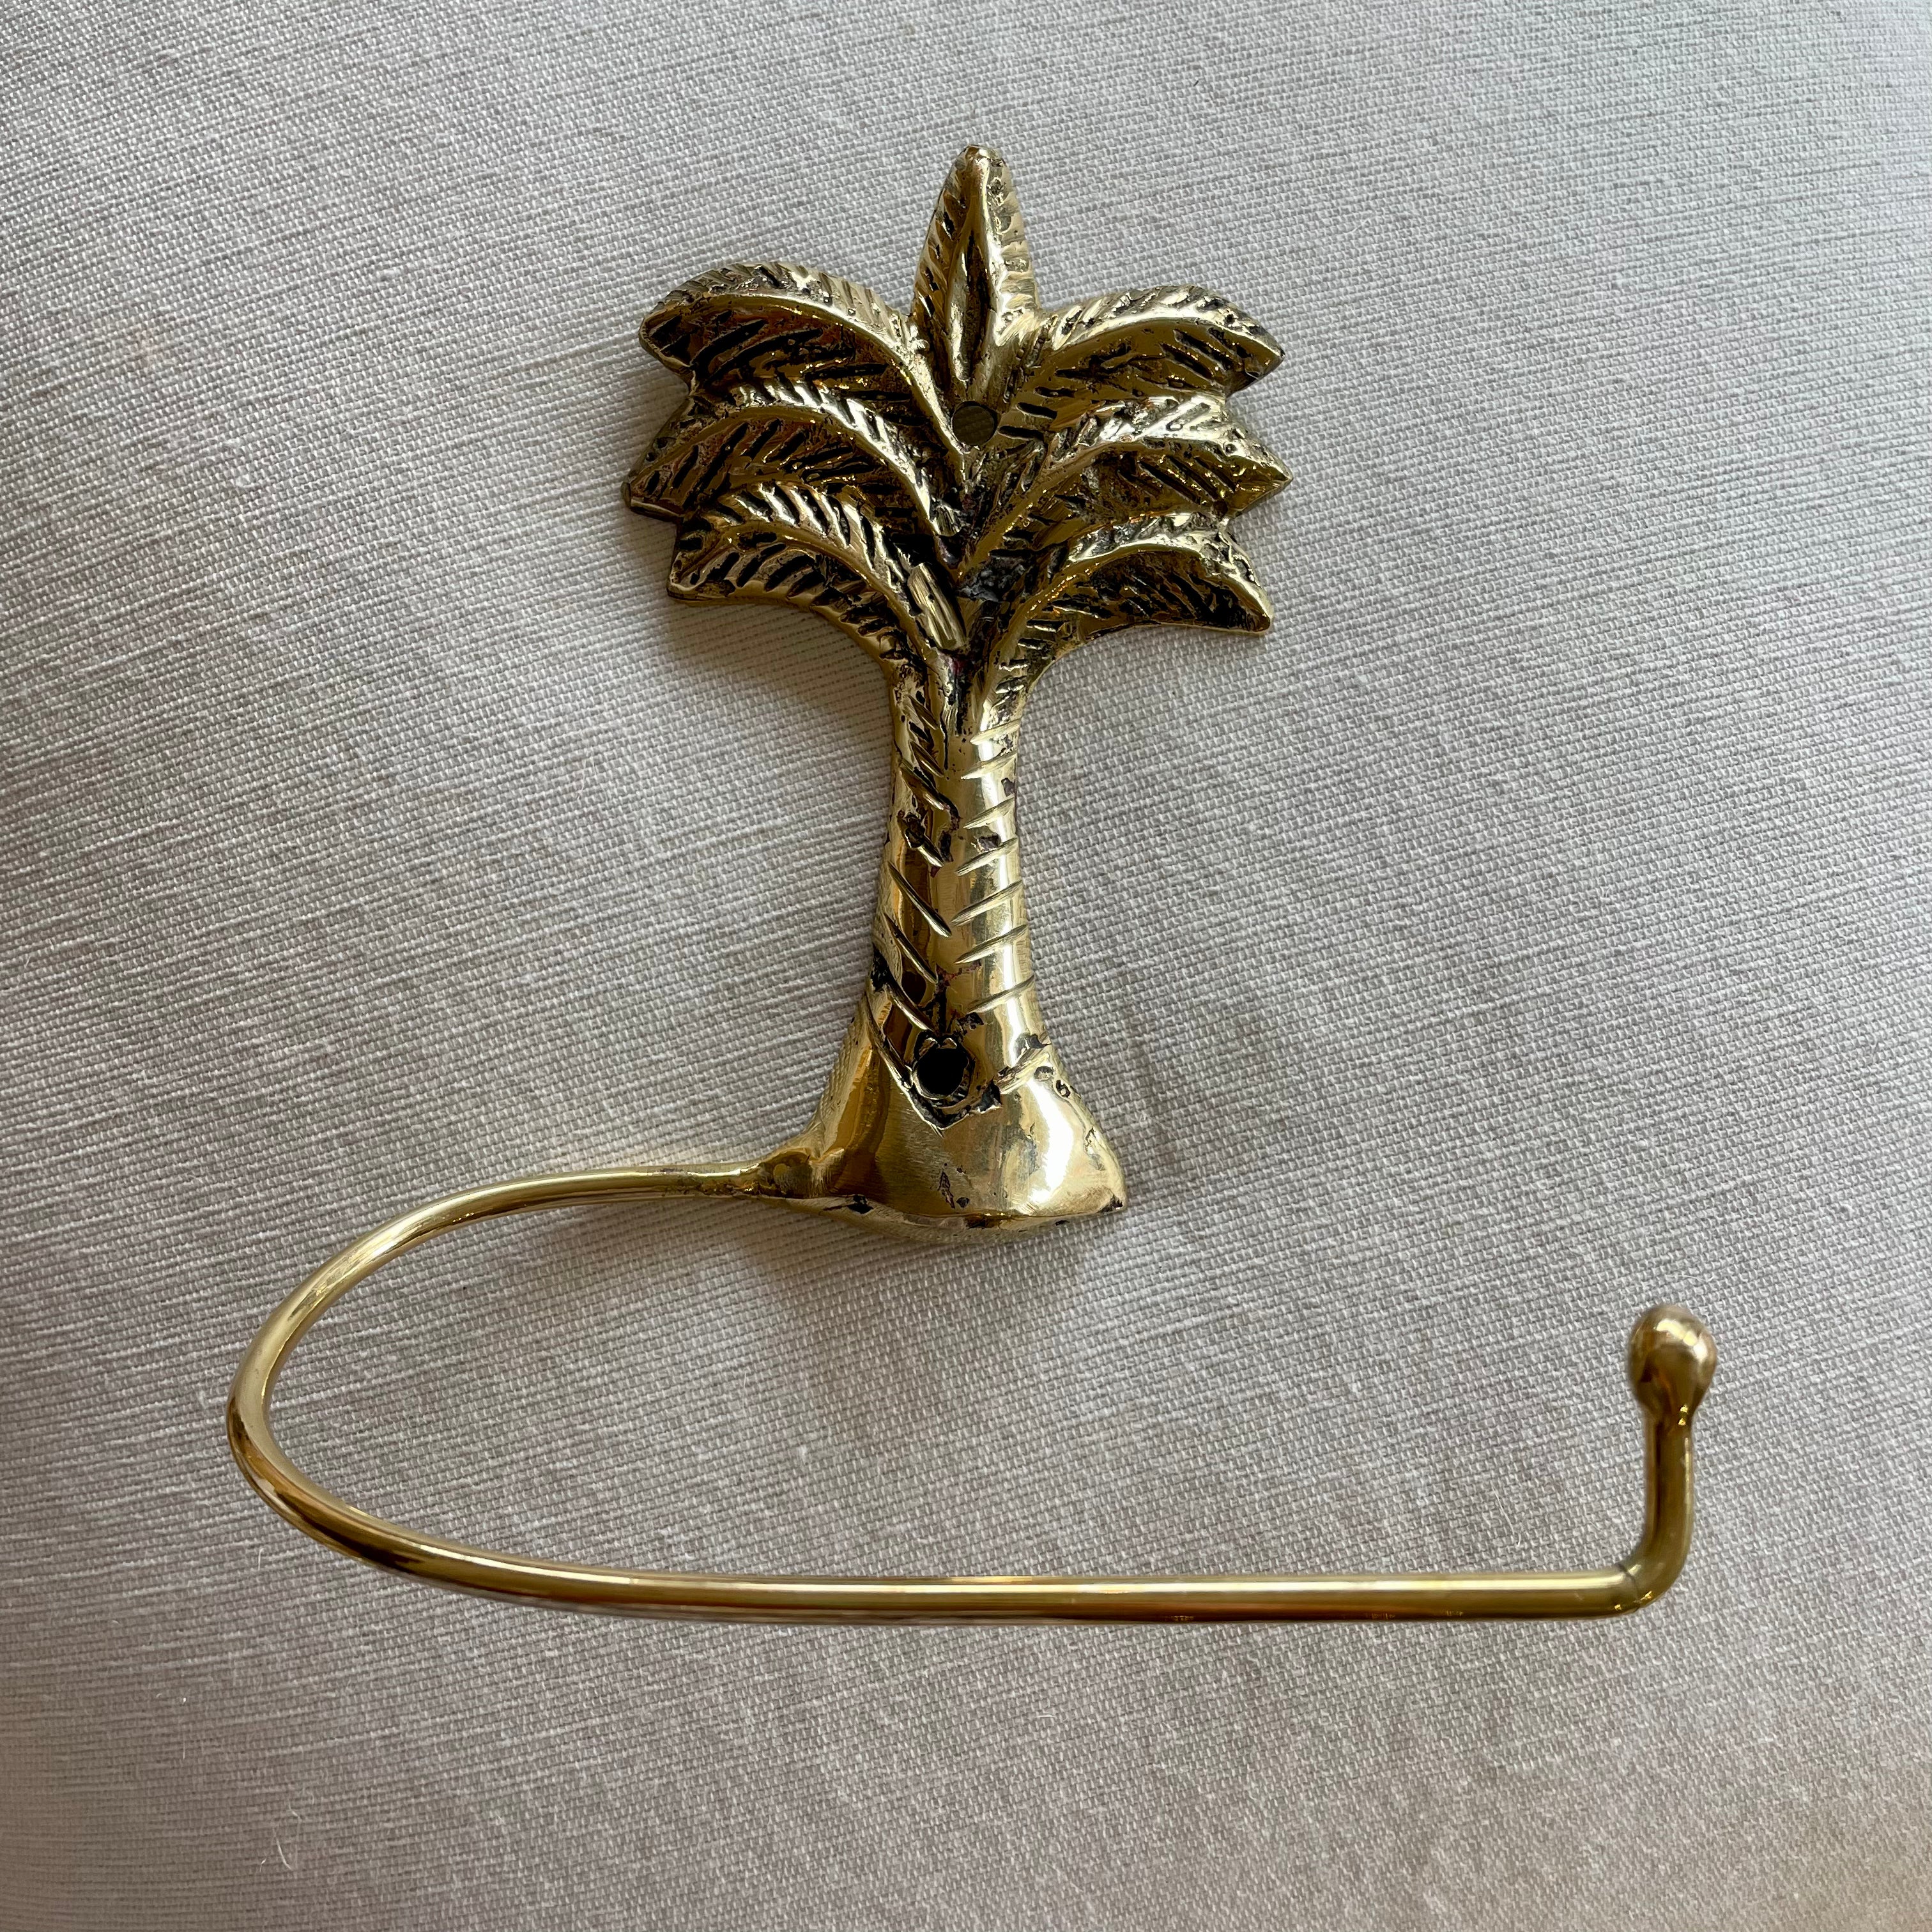 Tropical Palm Brass Toilet Roll Holder